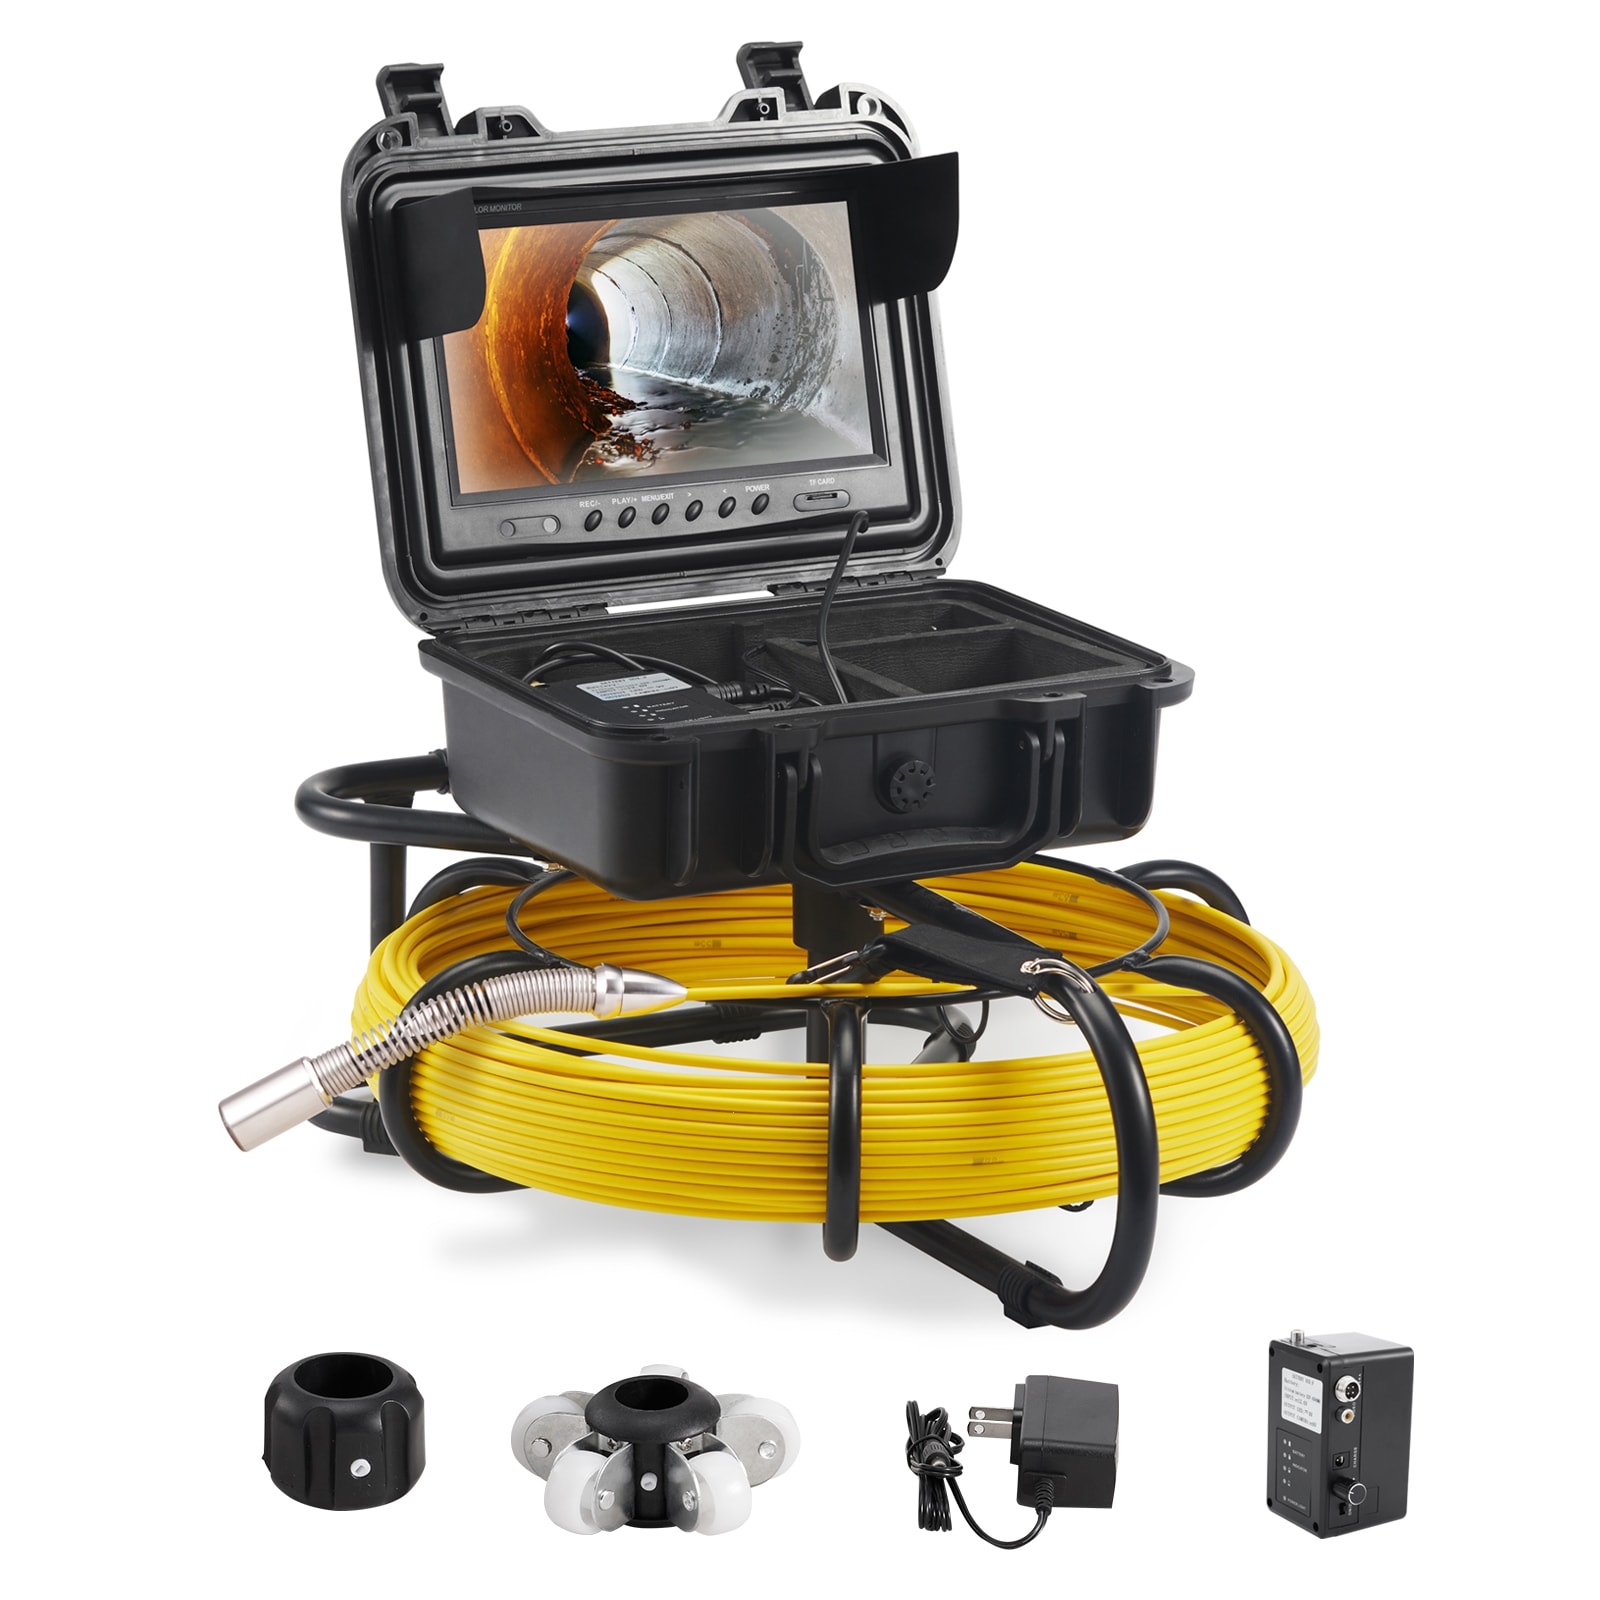 VEVOR VEVOR 20M Sewer Inspection Camera 9 Inch Monitor LCD DVR Waterproof  Pipeline Drain Inspection System Camera Kit with 8G SD Card (20M 9Inch)